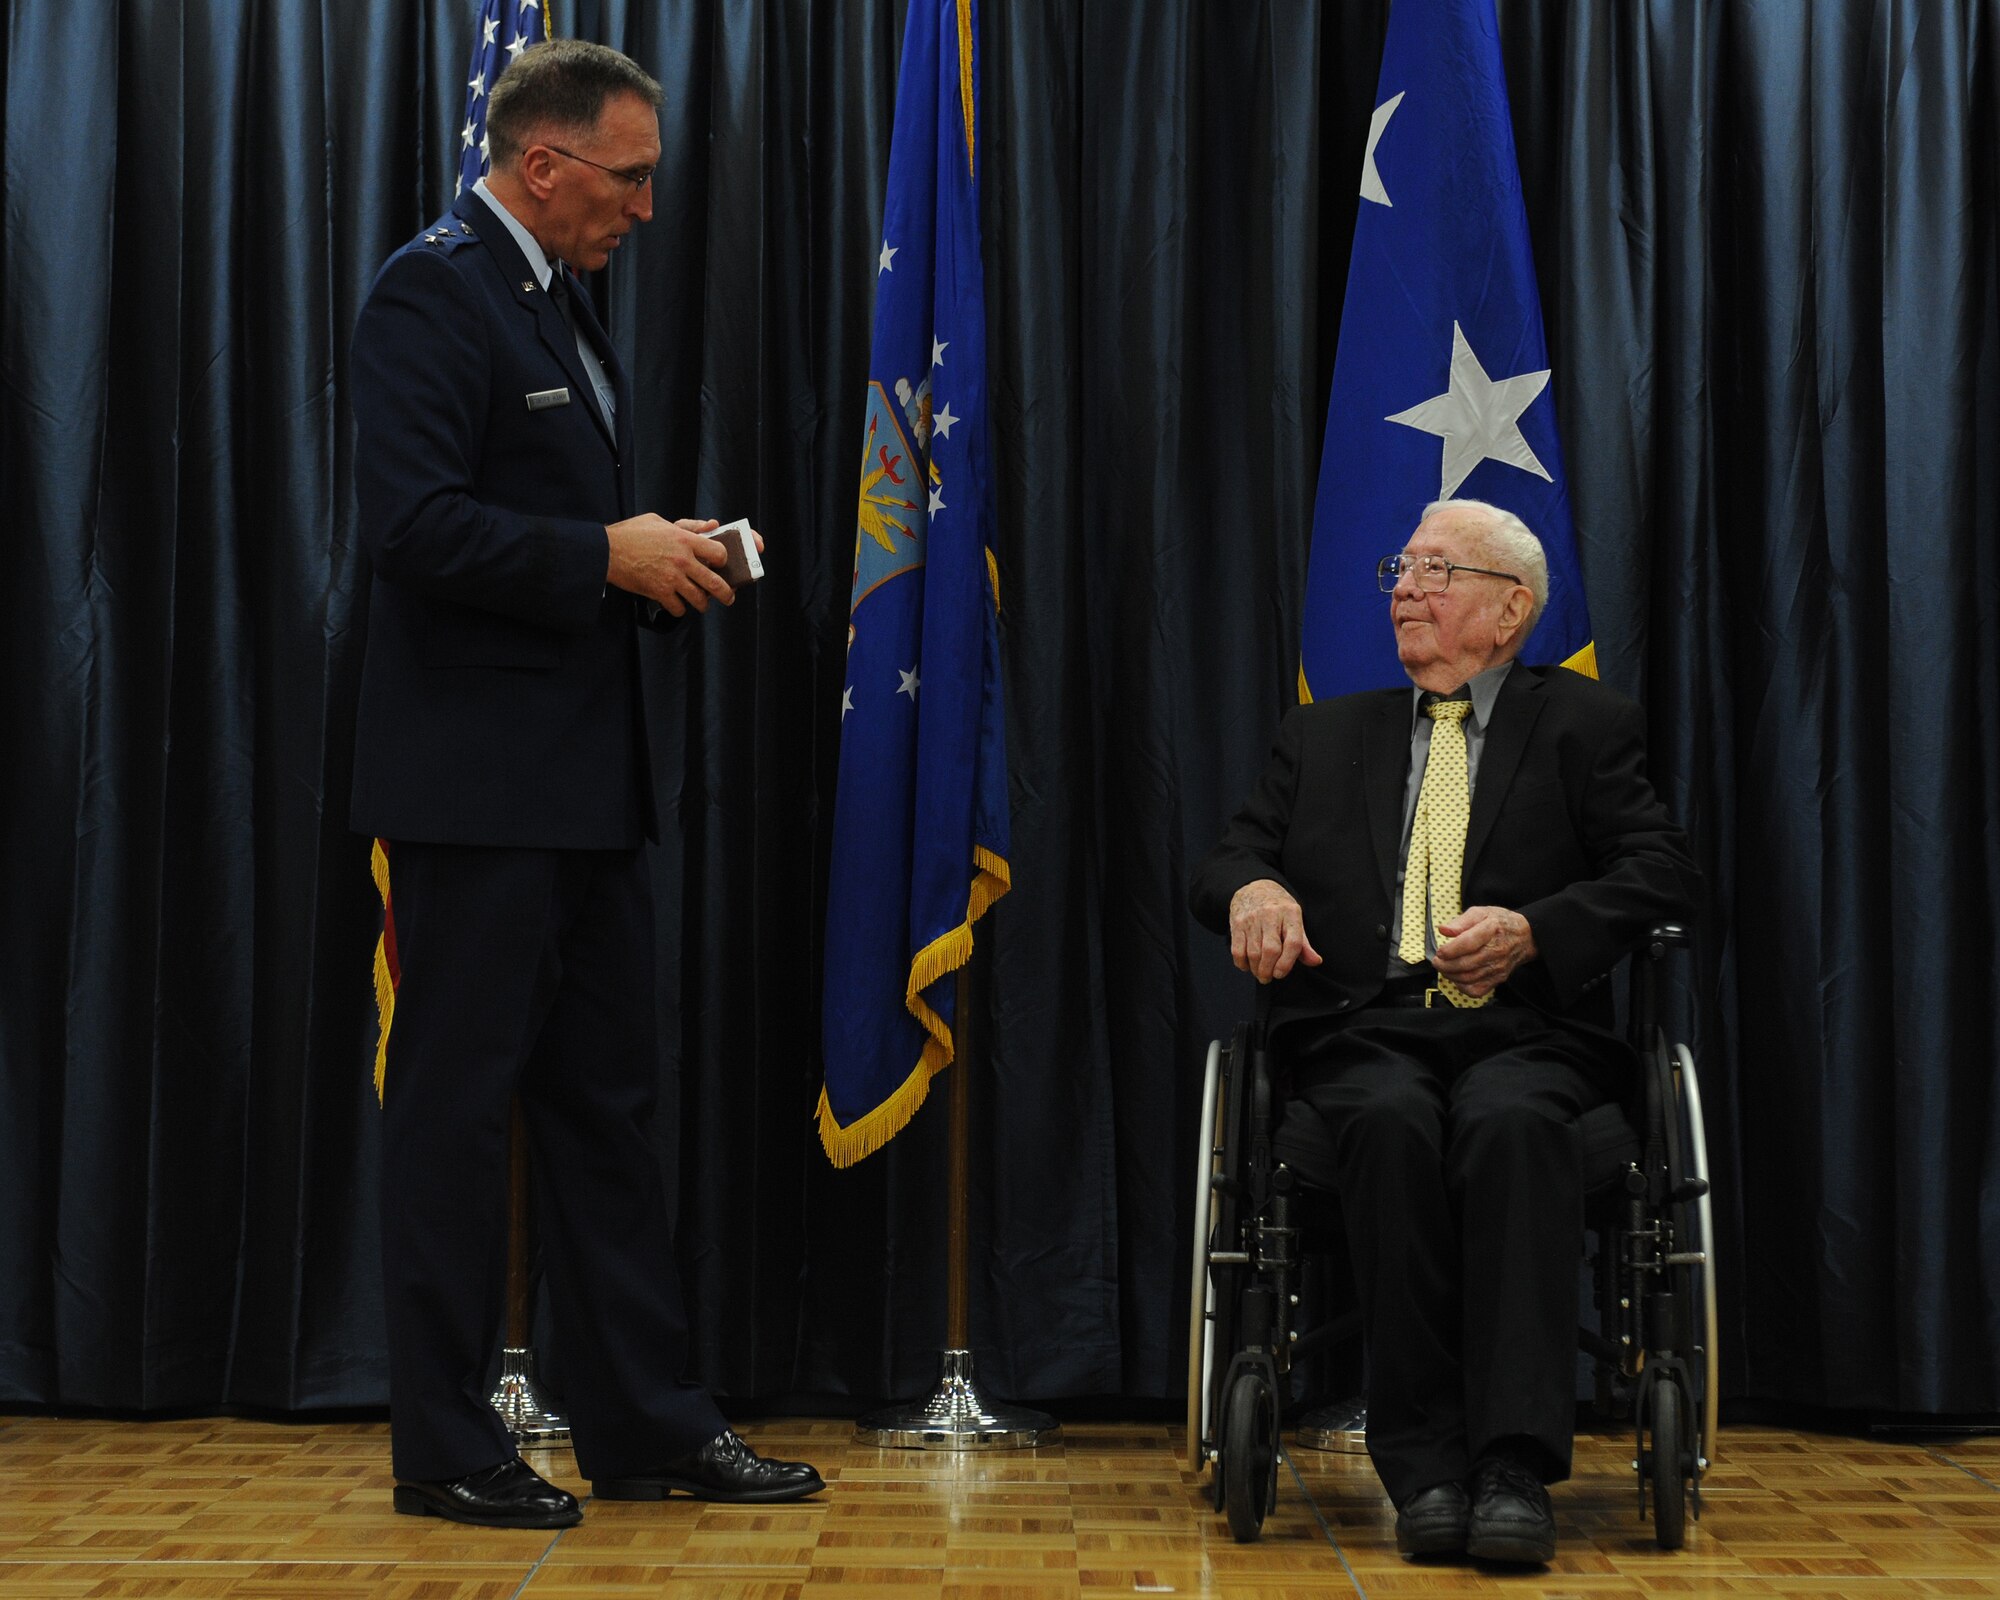 Maj. Gen. Scott Vander Hamm, 8th Air Force commander, speaks to John Carpenter, a World War II veteran, during an award presentation on Barksdale Air Force Base, La., July 1, 2014. Carpenter received the French Legion of Honor for his service during World War II, which included his participation in D-Day and the Battle of the Bulge. (U.S. Air Force photo/Senior Airman Benjamin Gonsier)